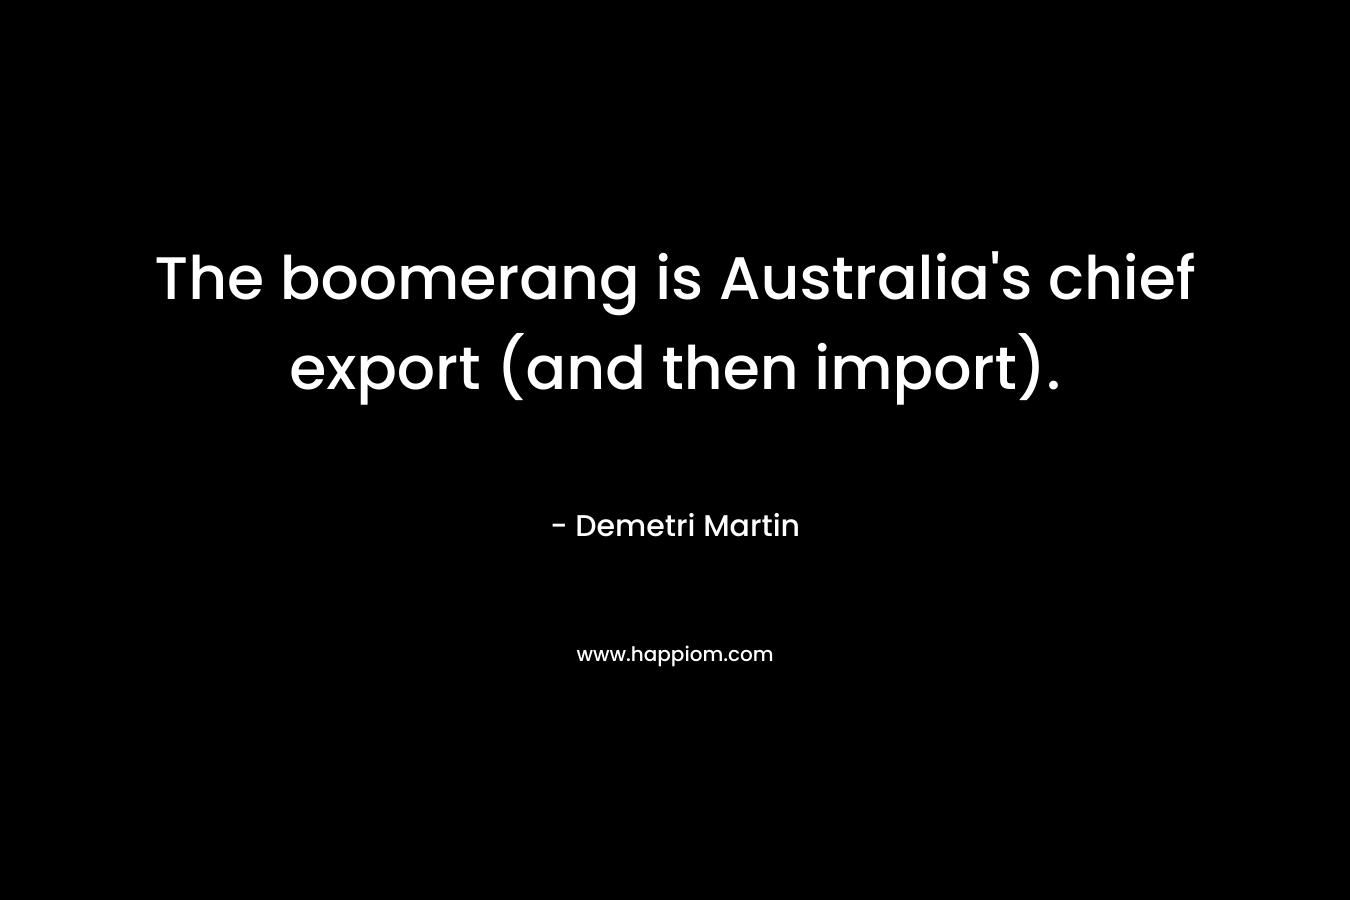 The boomerang is Australia's chief export (and then import).